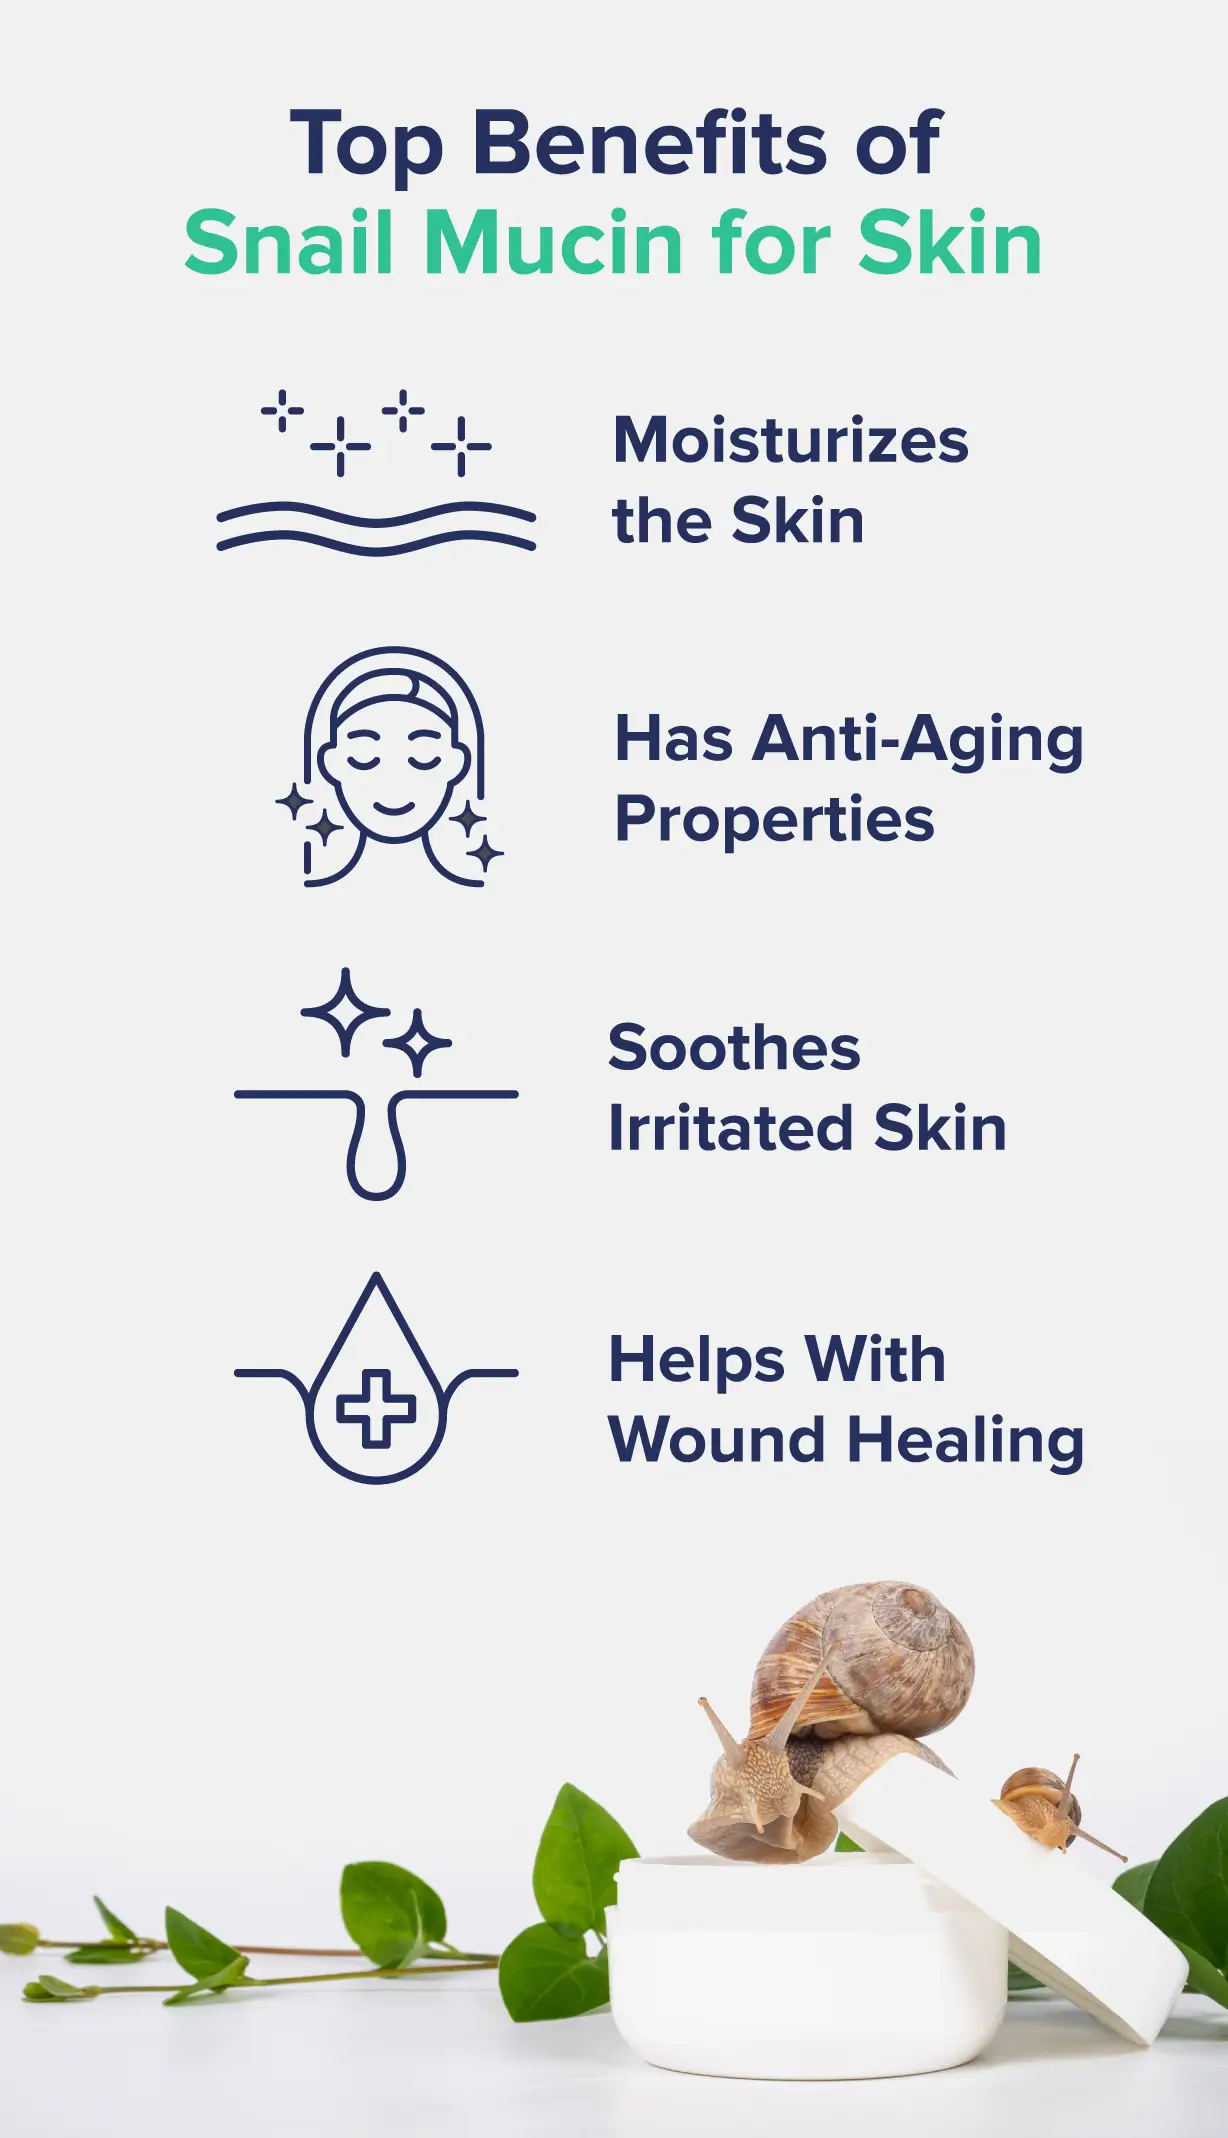 A graphic entitled "Top Benefits of Snail Mucin for Skin," listing several benefits like moisturizing and anti-aging properties, each accompanied by a small icon. 